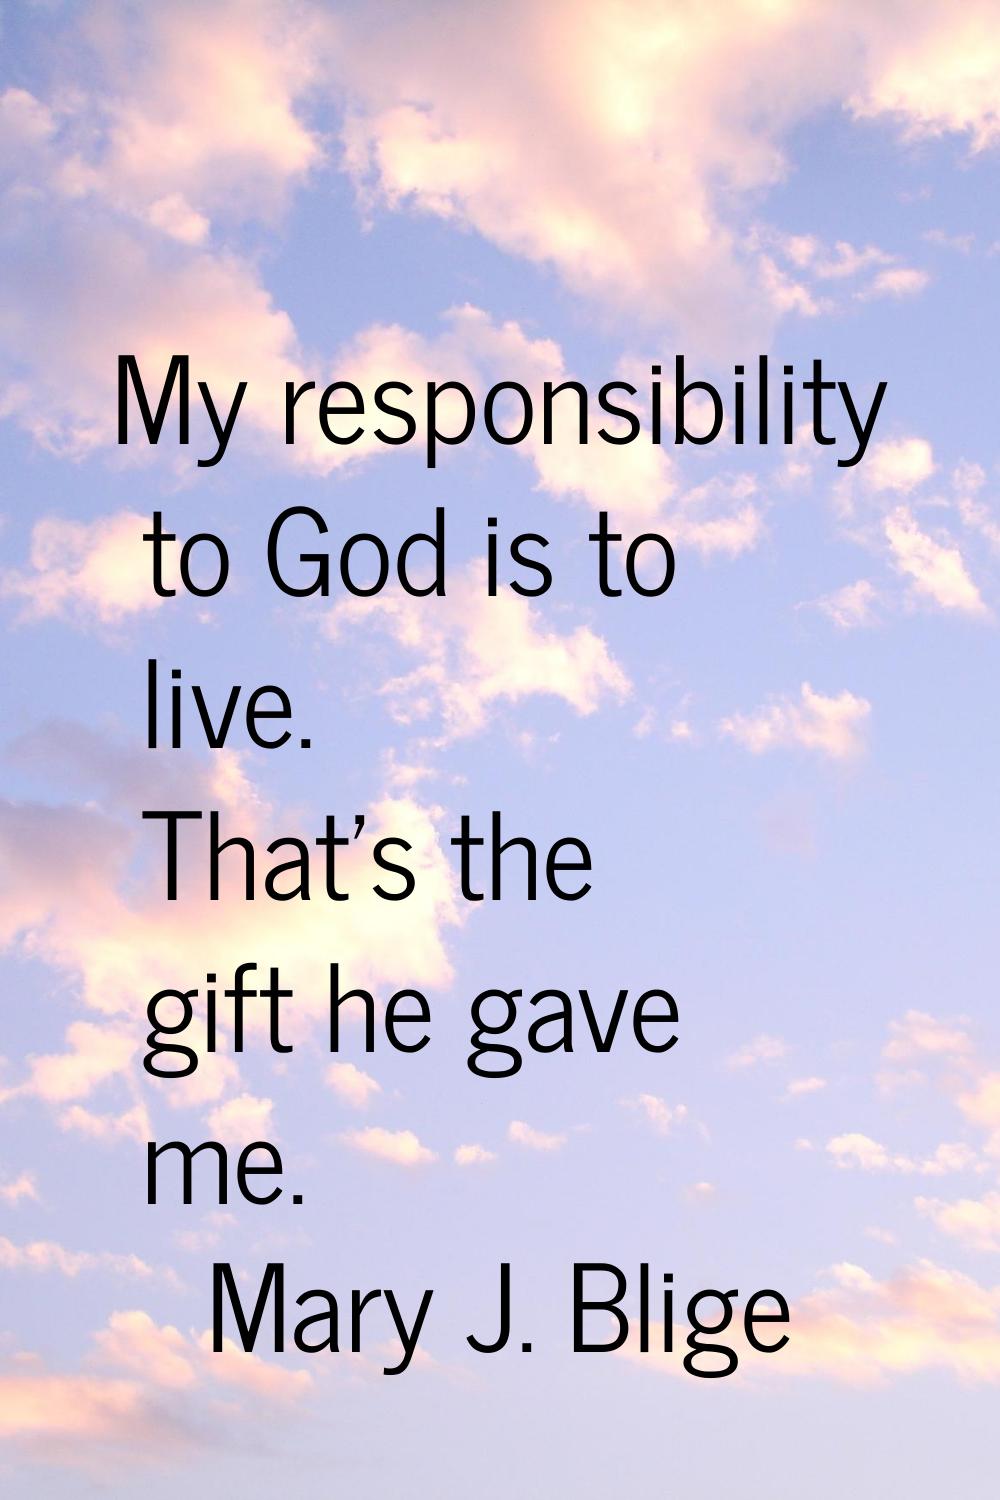 My responsibility to God is to live. That's the gift he gave me.